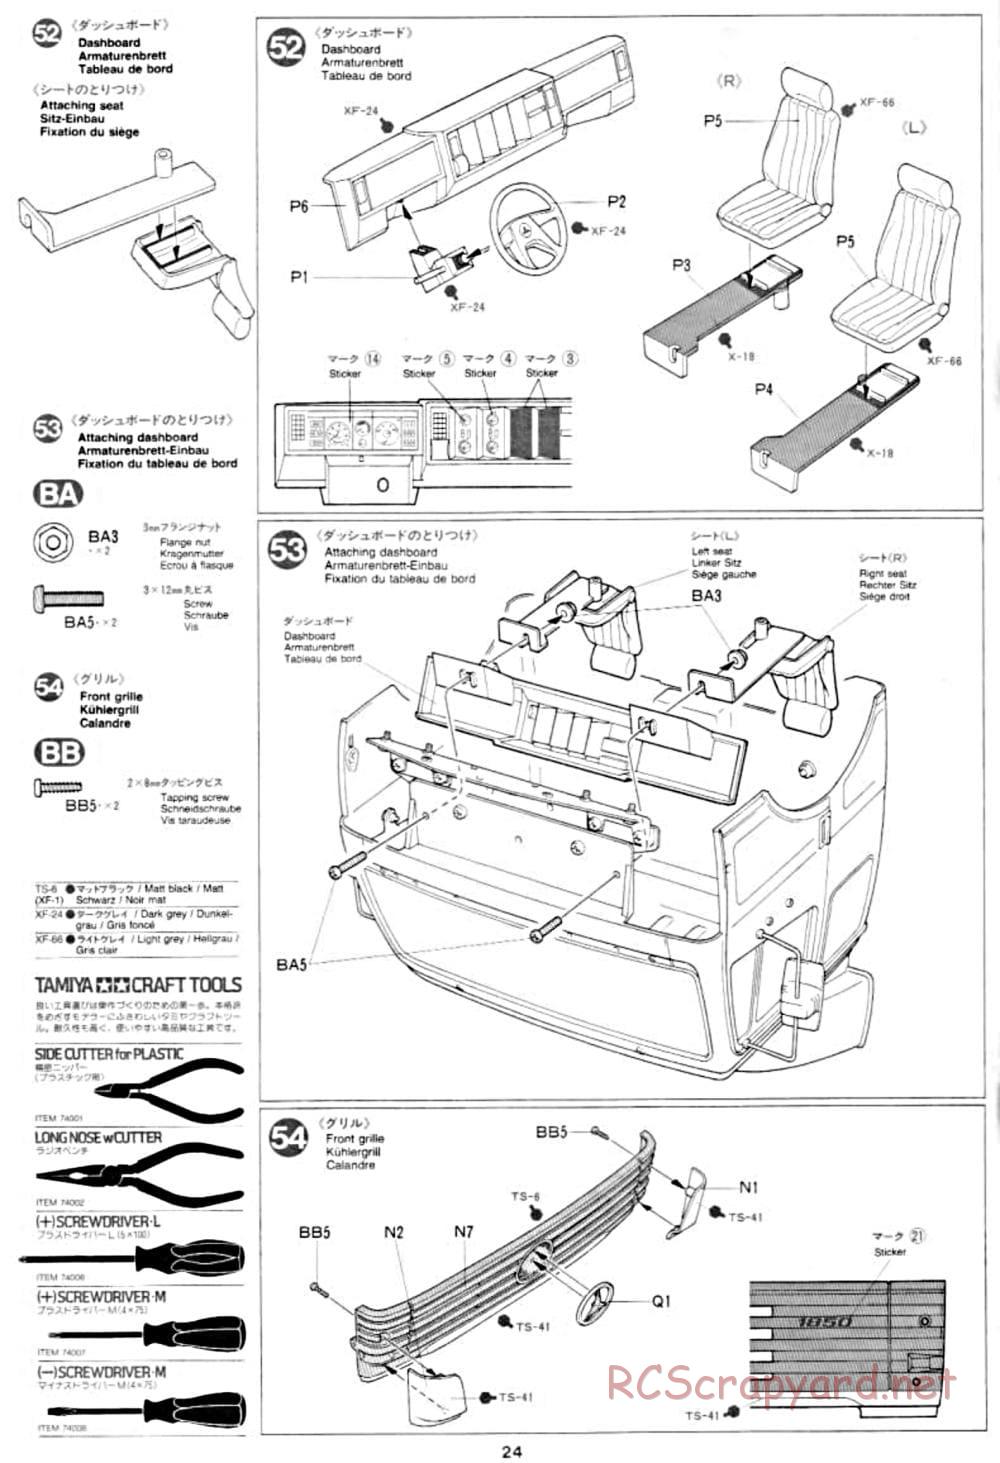 Tamiya - Mercedes-Benz 1850L Delivery Truck - Manual - Page 24